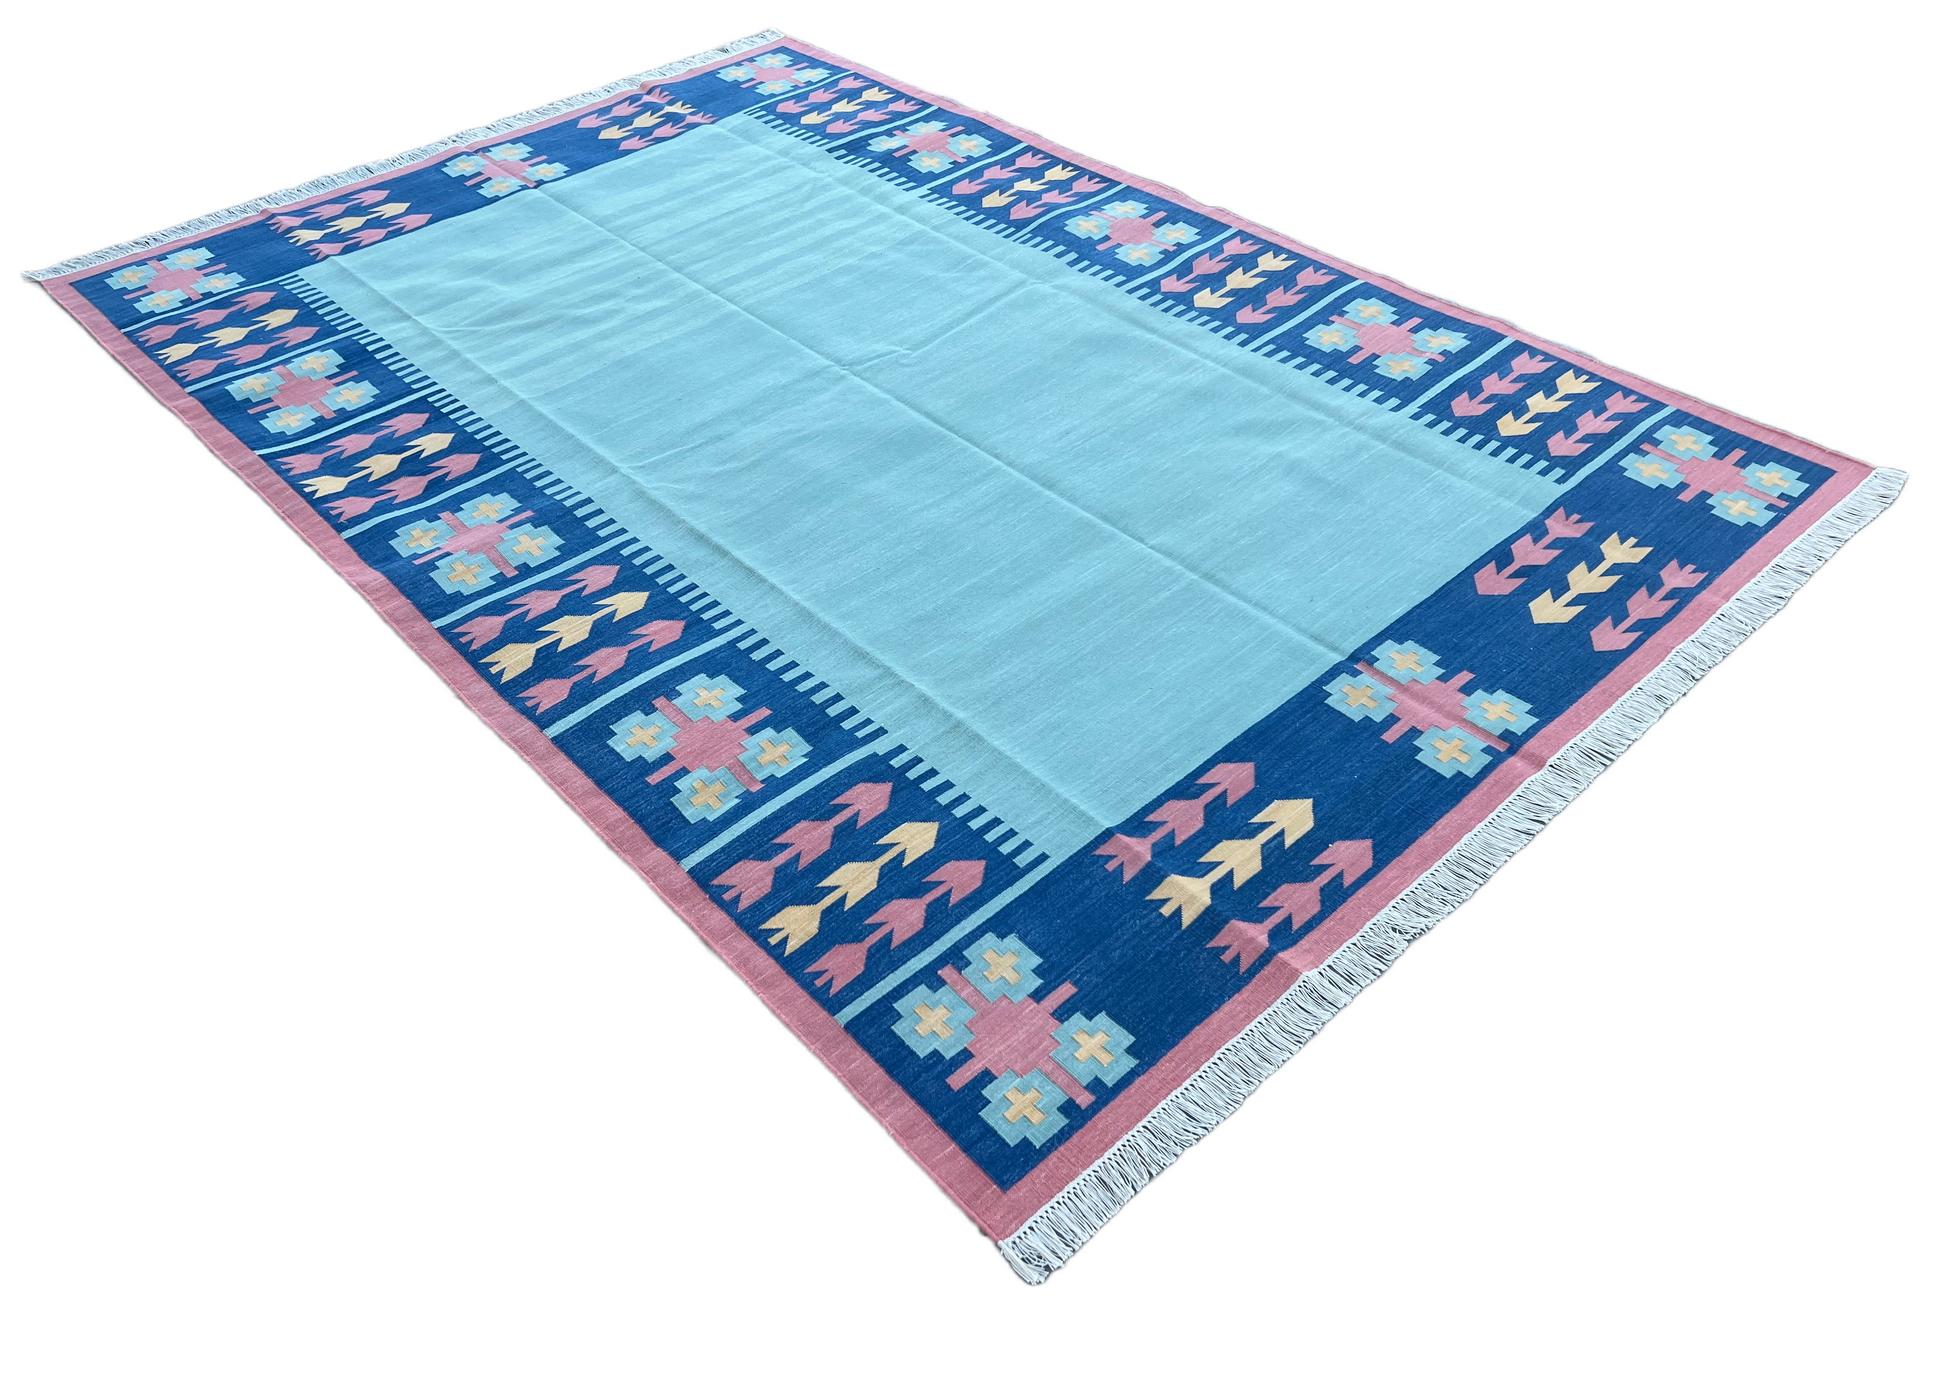 Hand-Woven Handmade Cotton Area Flat Weave Rug, Sky Blue & Pink Leaf Pattern Indian Dhurrie For Sale